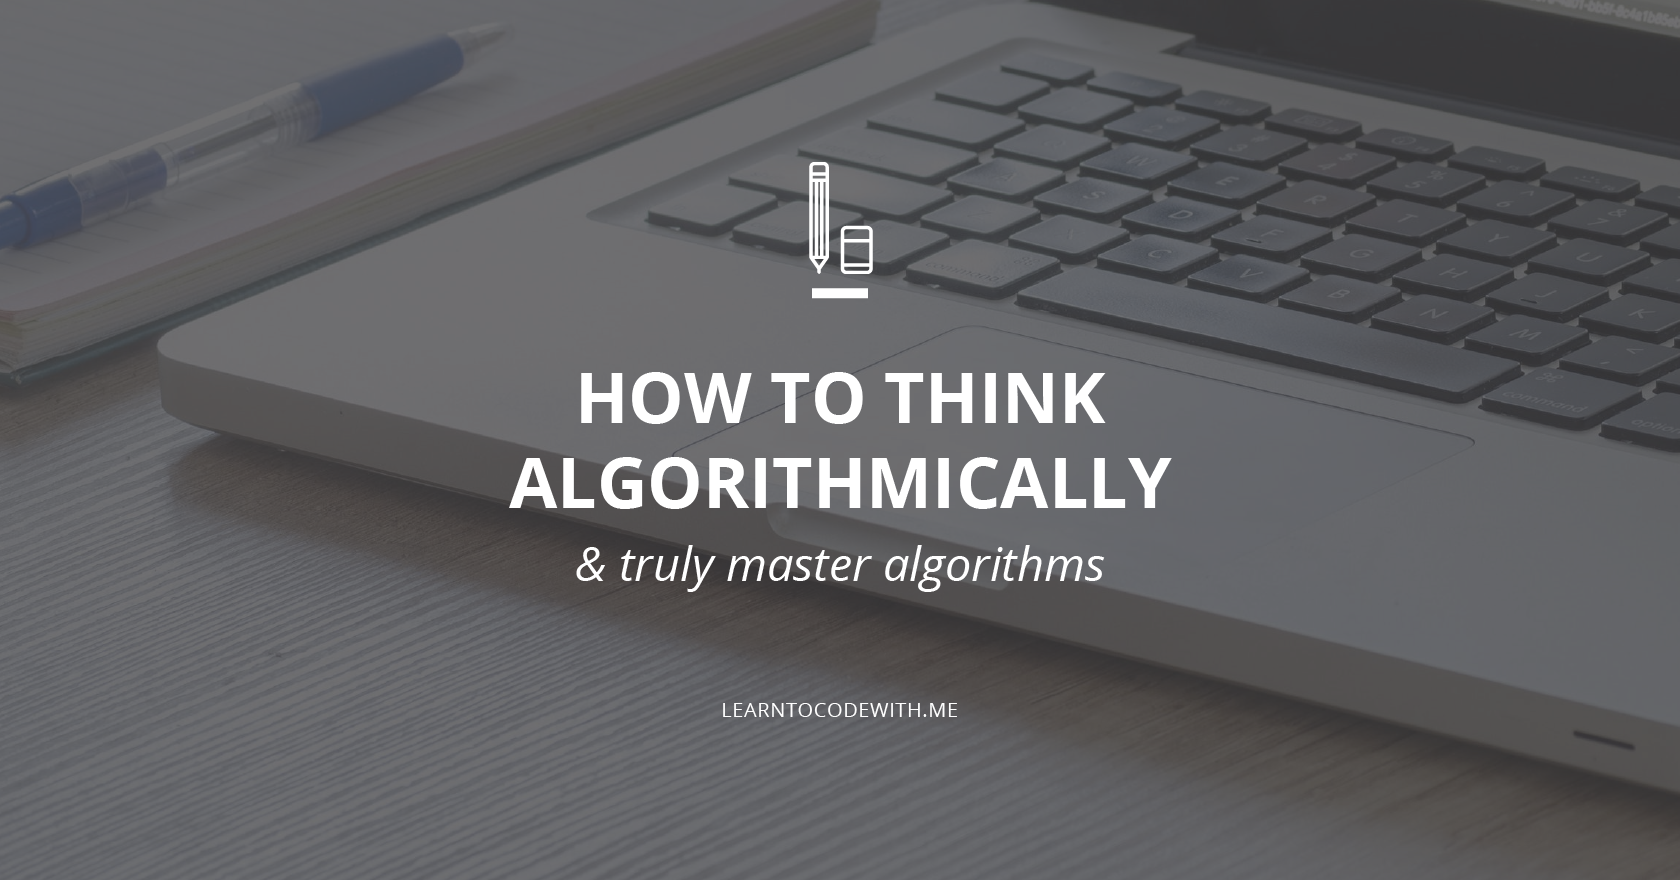 How to think algorithmically